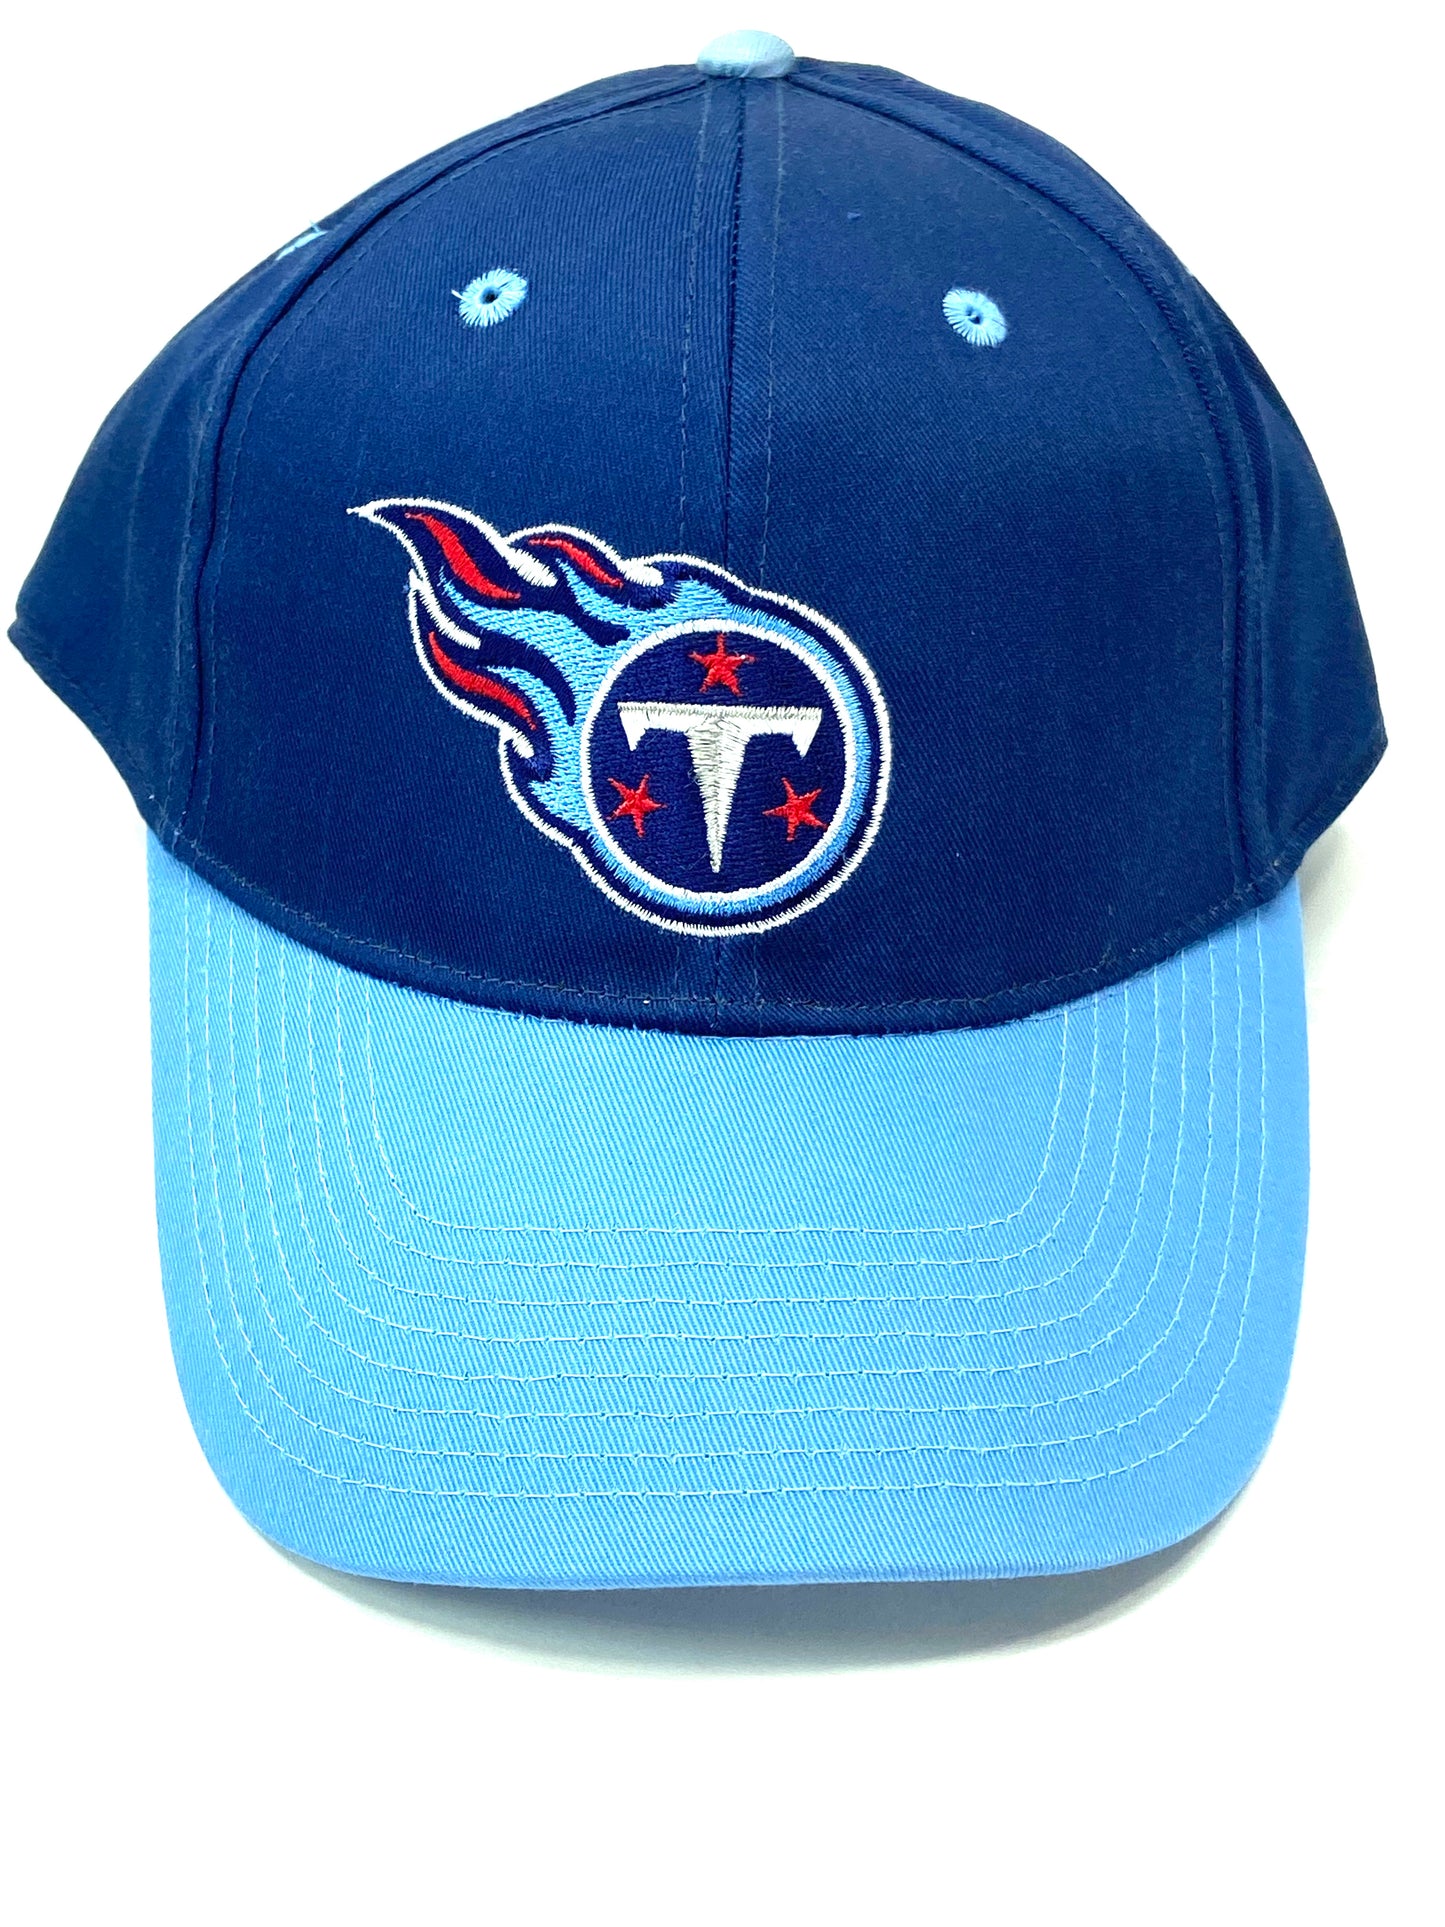 Tennessee Titans Vintage NFL Blue Cotton/Poly Snapback NOS By Drew Pearson